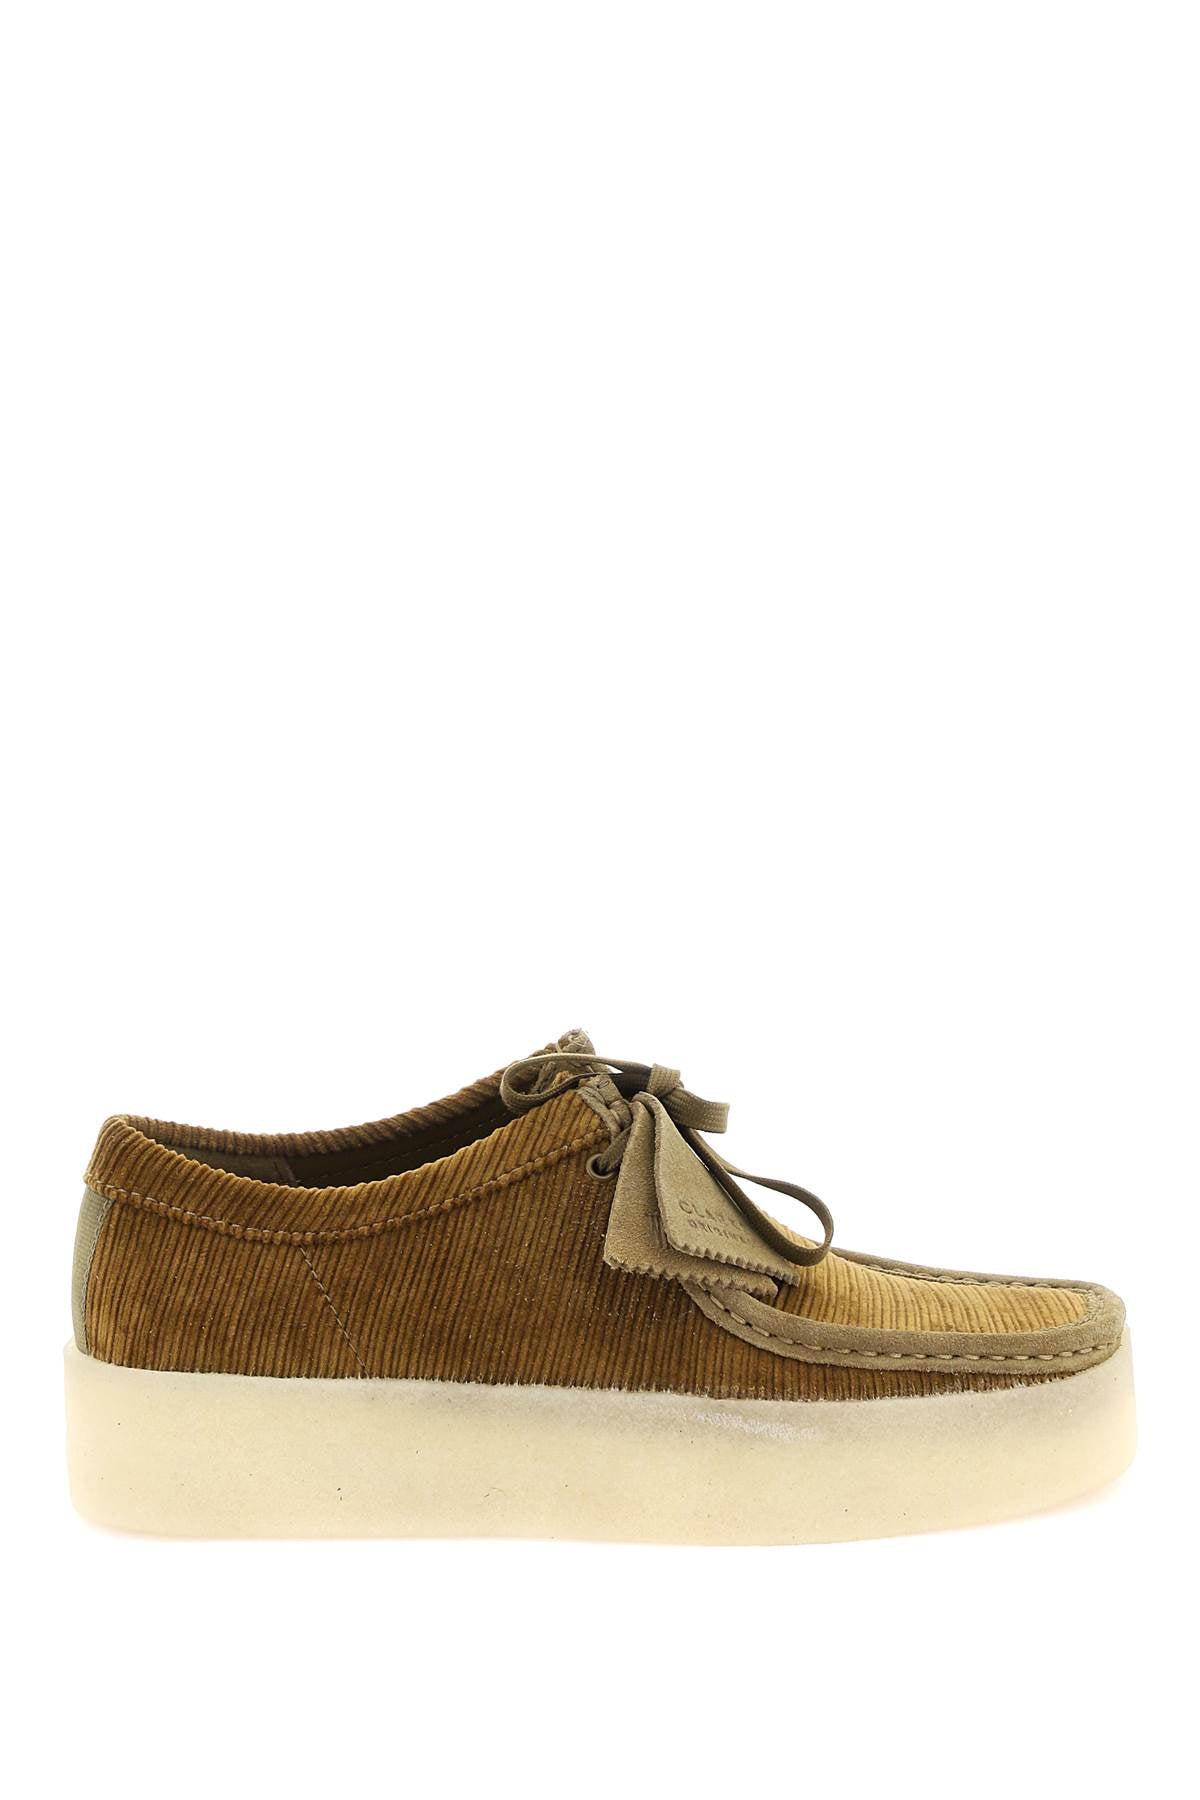 Clarks Clarks originals wallabee cup lace-up shoes